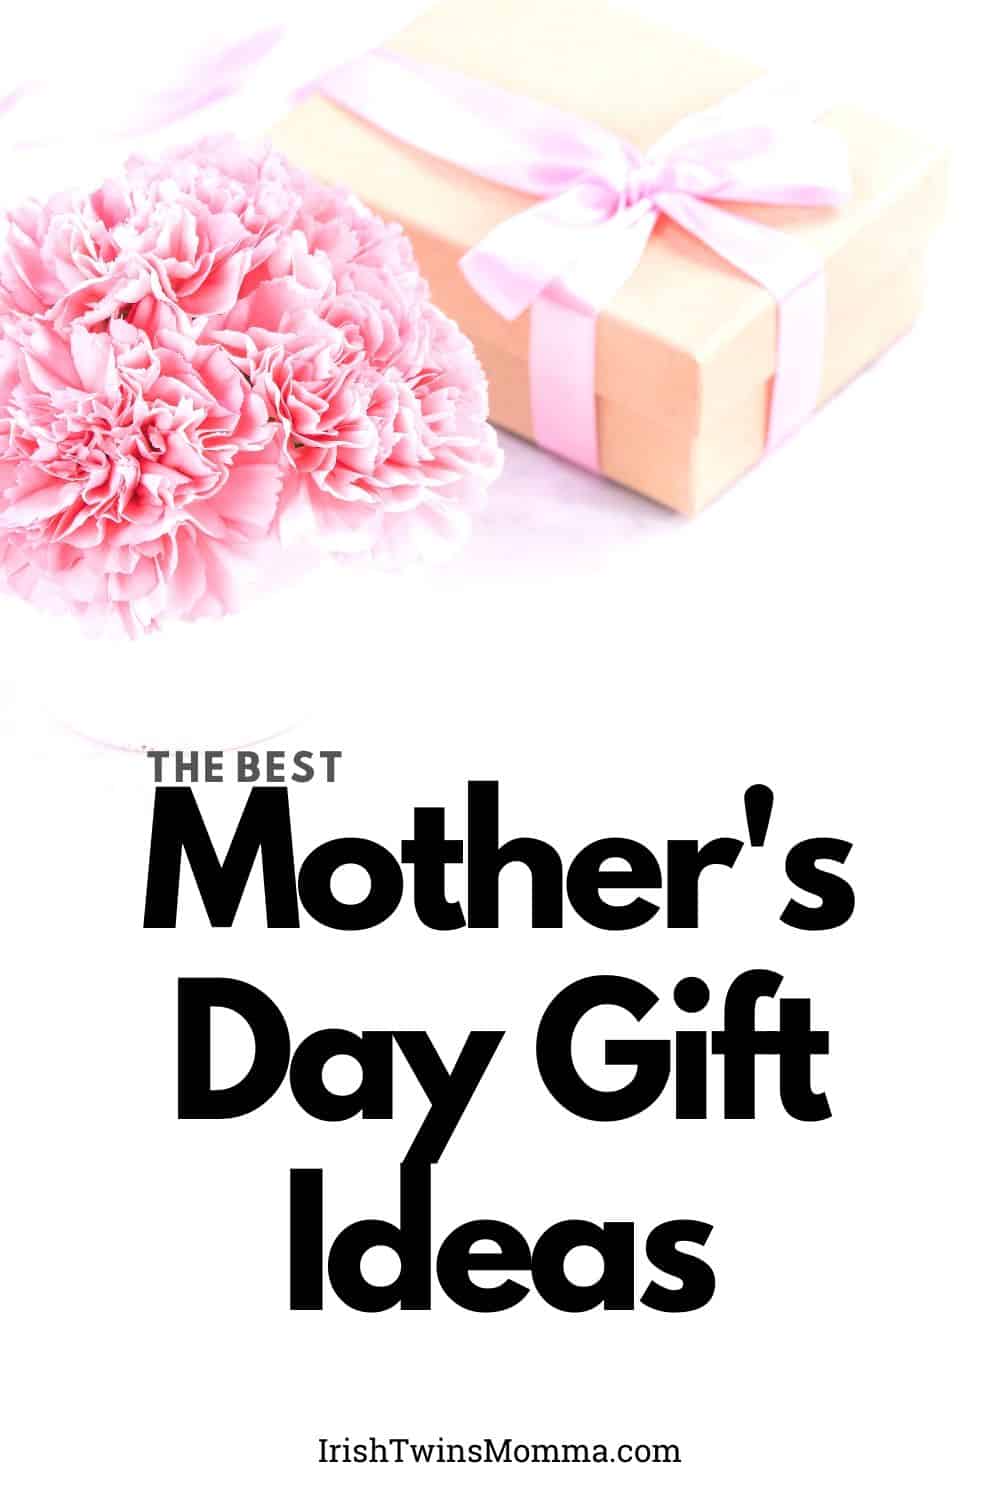 The best mothers day gift ideas for the special women in your life that include beauty, fashion, coffee, wine, and more. via @irishtwinsmom11